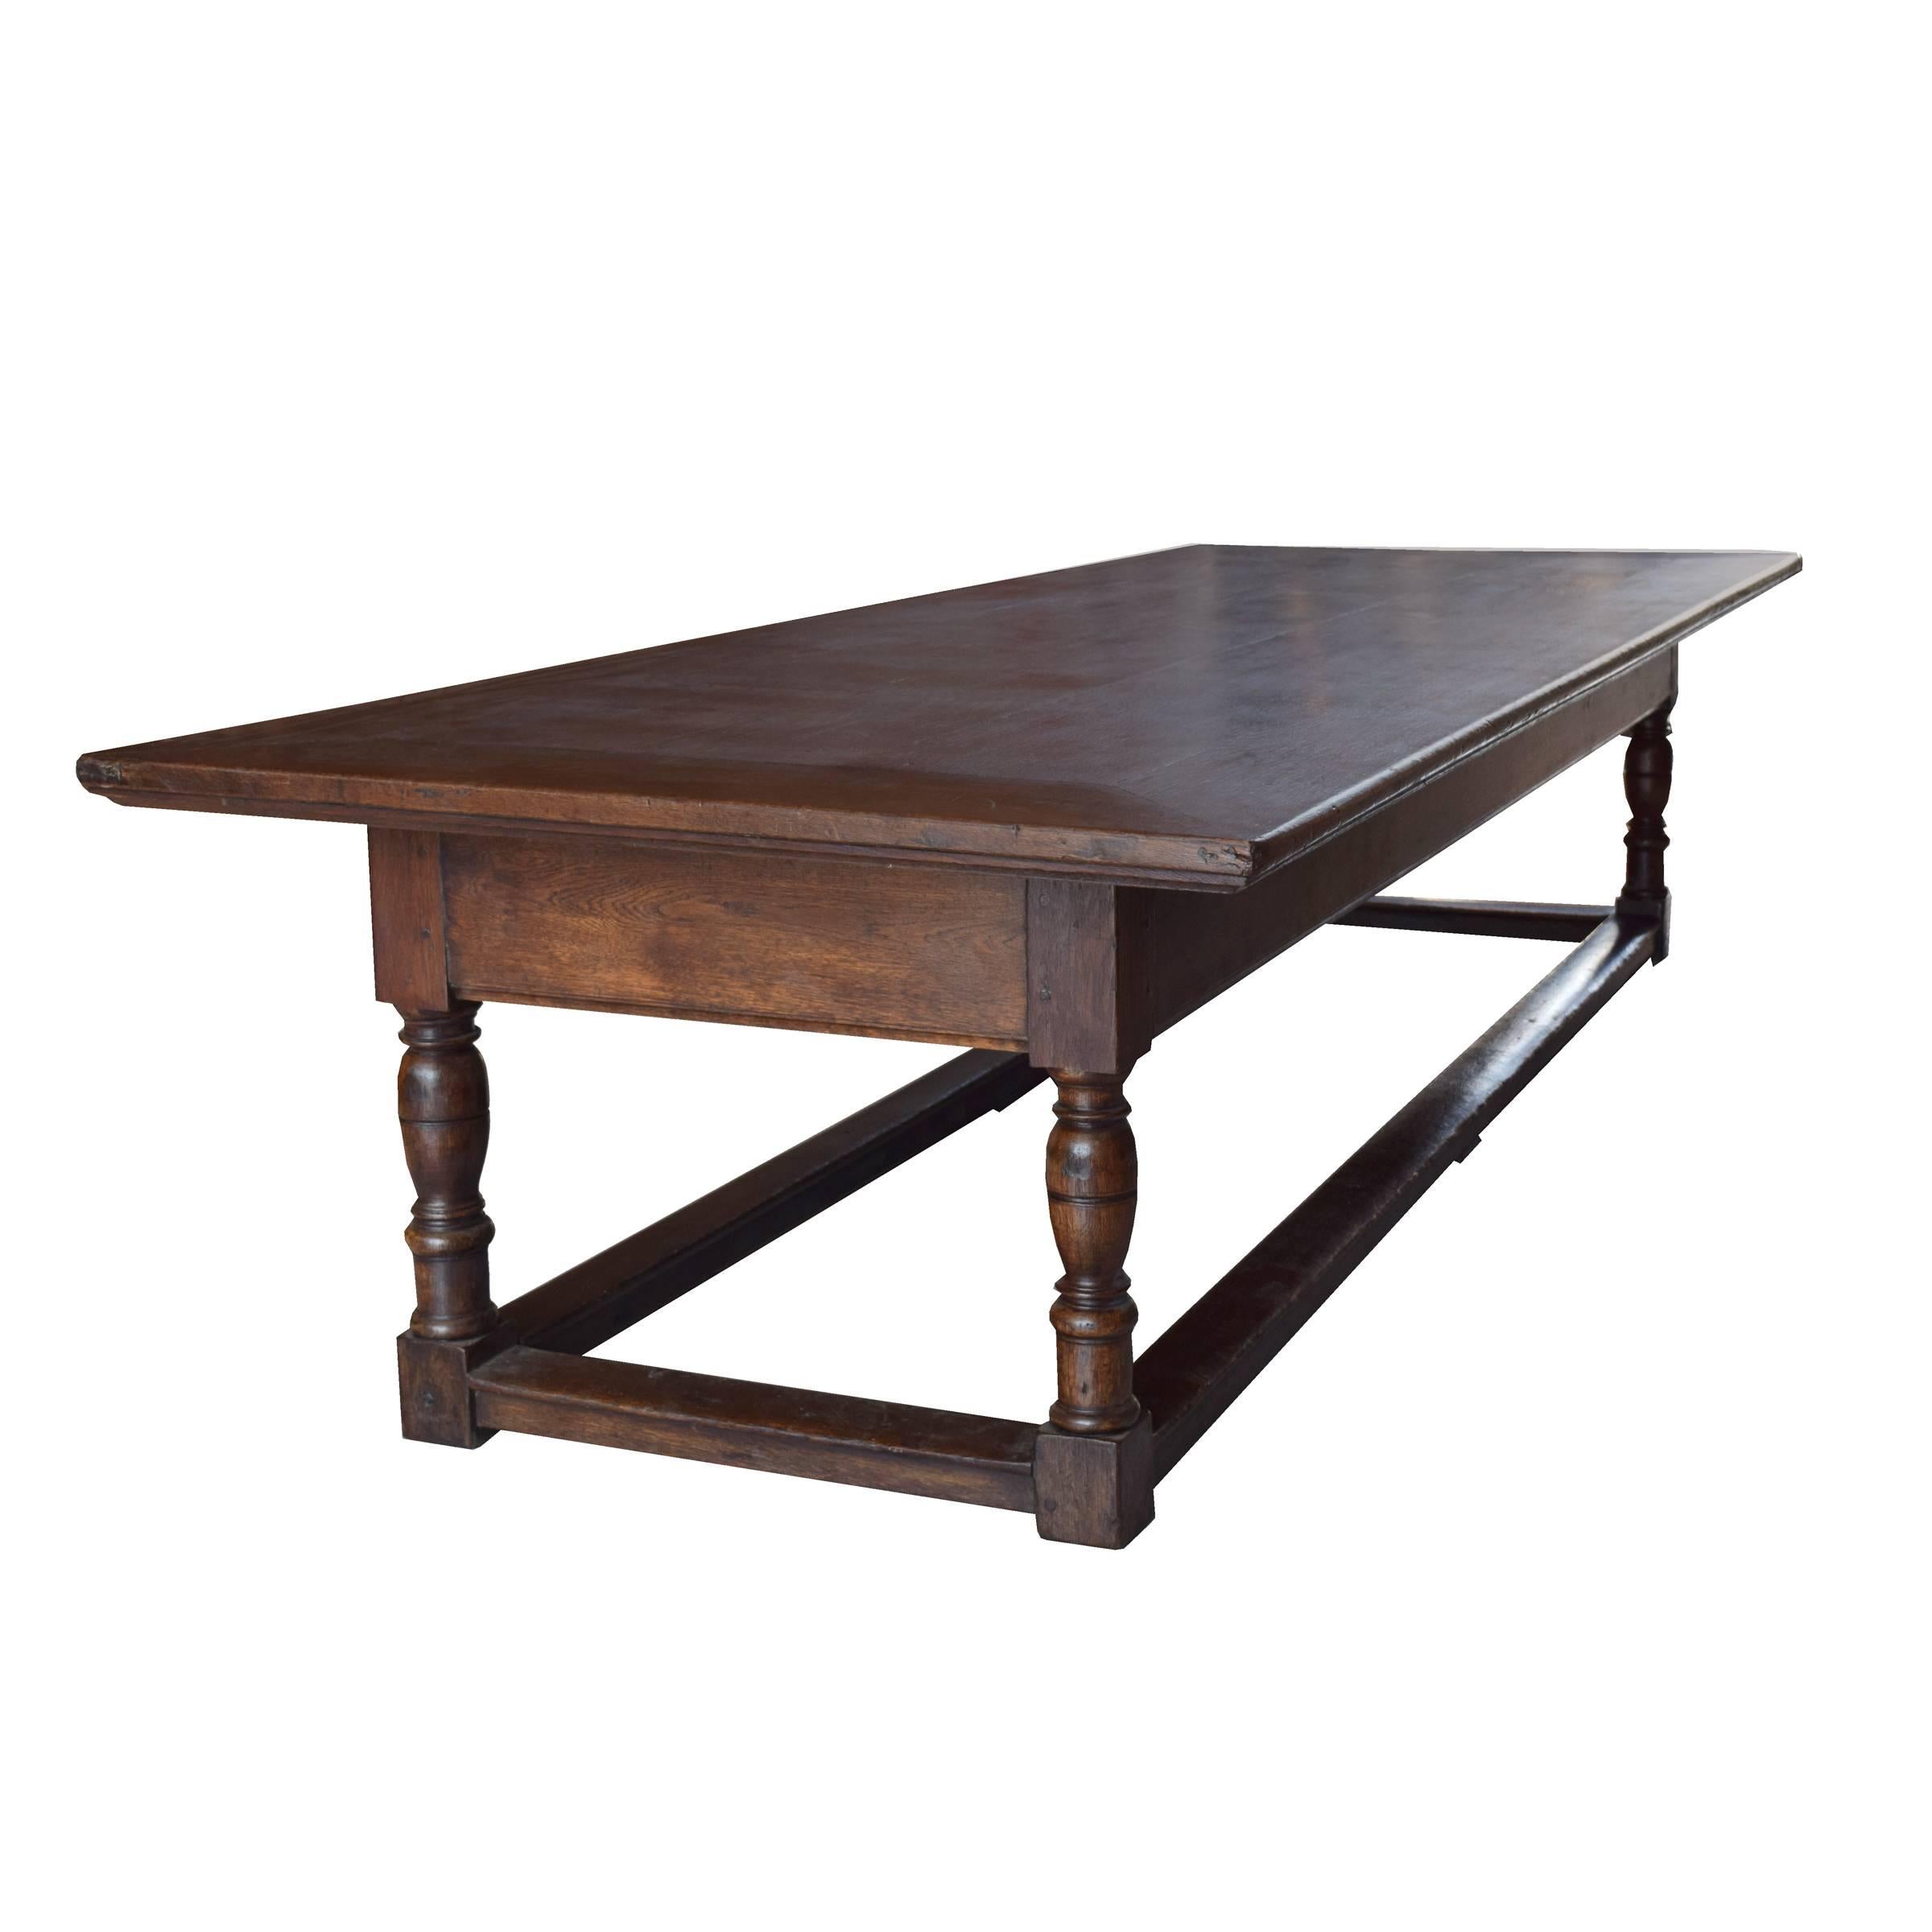 A monumental French refectory oak table of excellent quality with four turned legs and stretchers on all sides, late 18th-early 19th century.